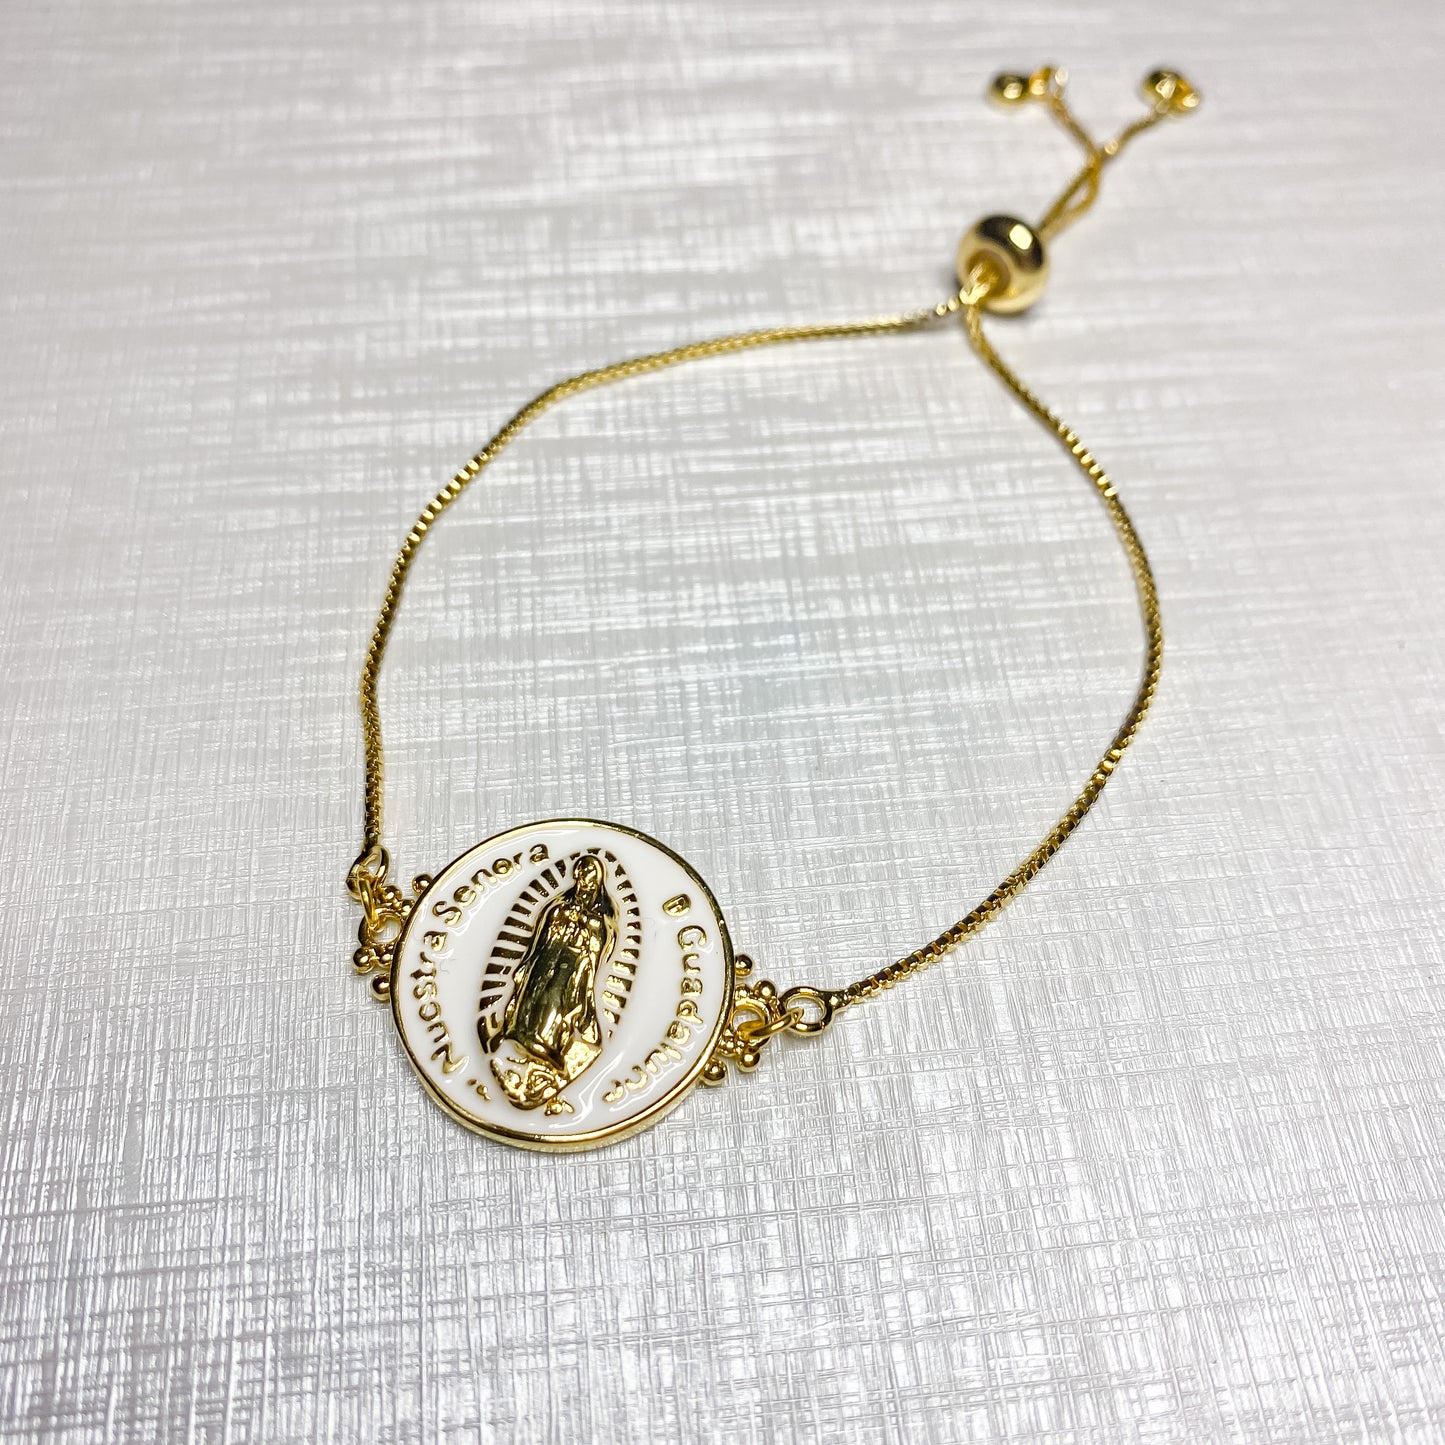 Bracelet - Our Lady of Guadalupe